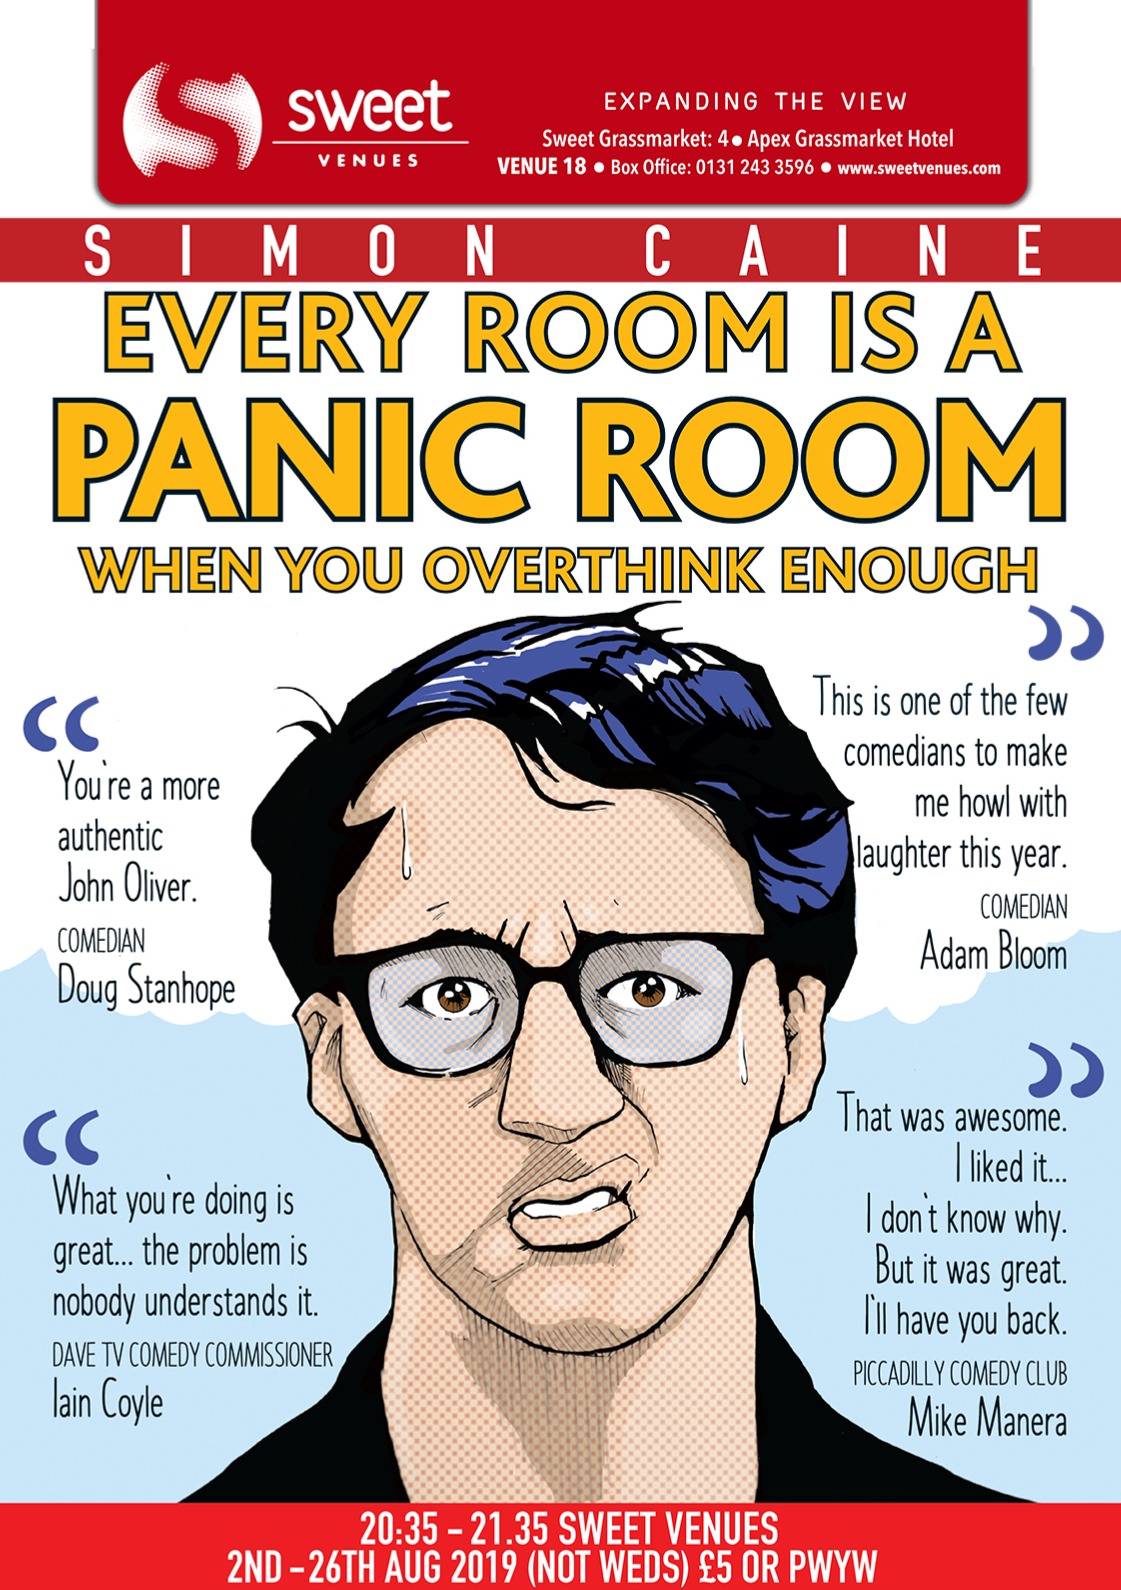 The poster for Simon Caine: Every Room Becomes a Panic Room When You Overthink Enough